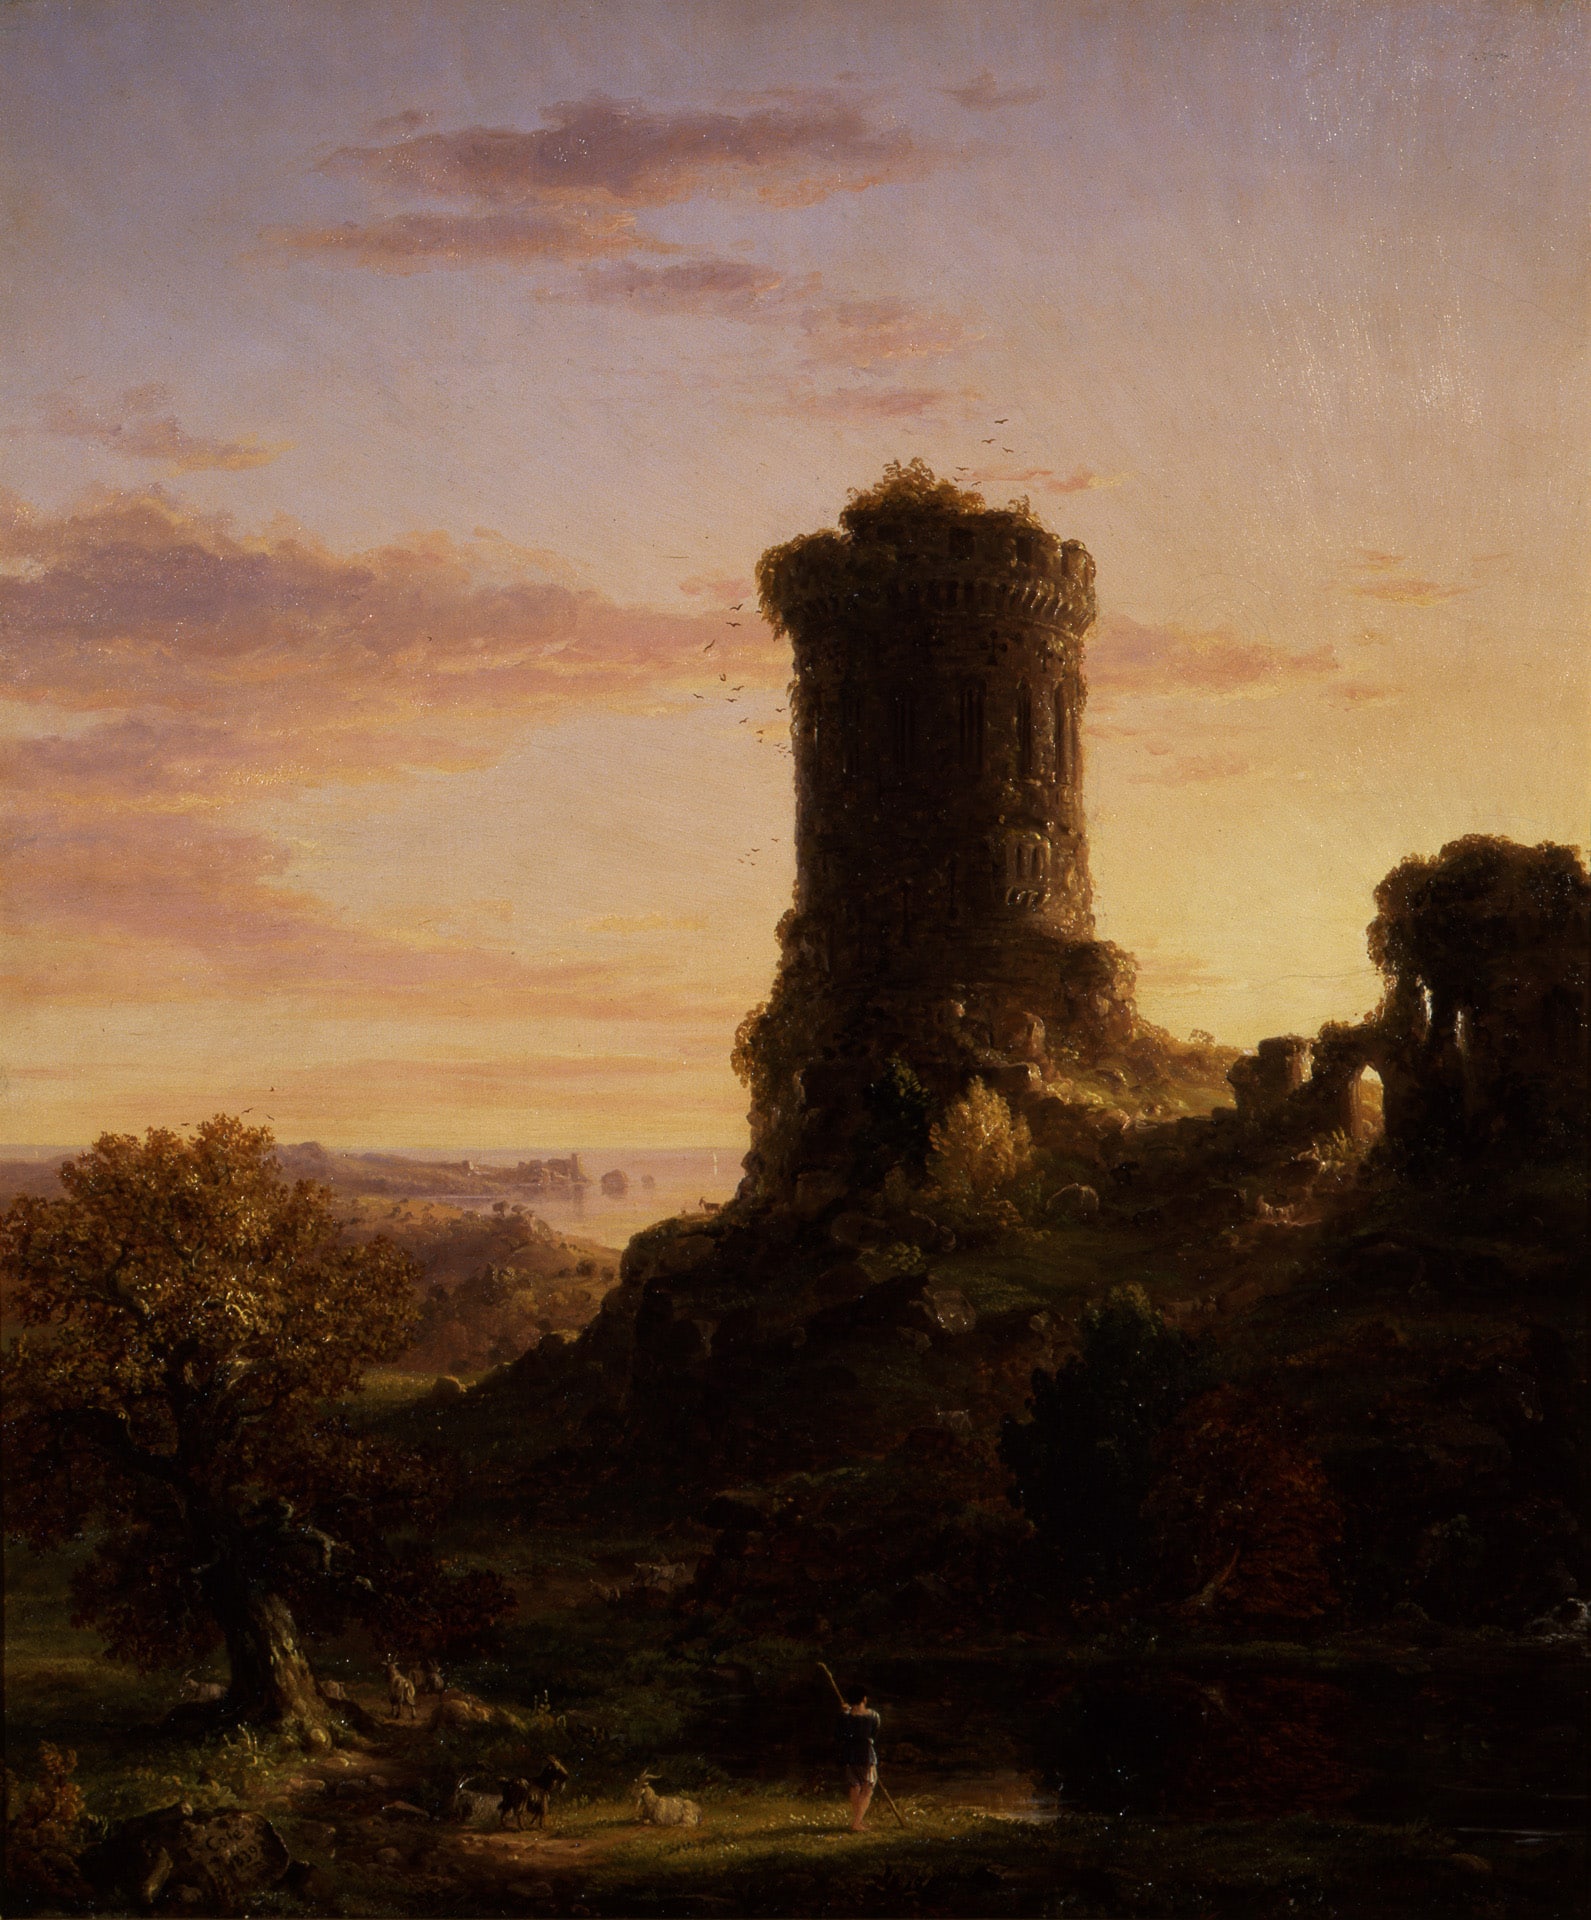 a landscape of a ruined tower with a dramatic sky